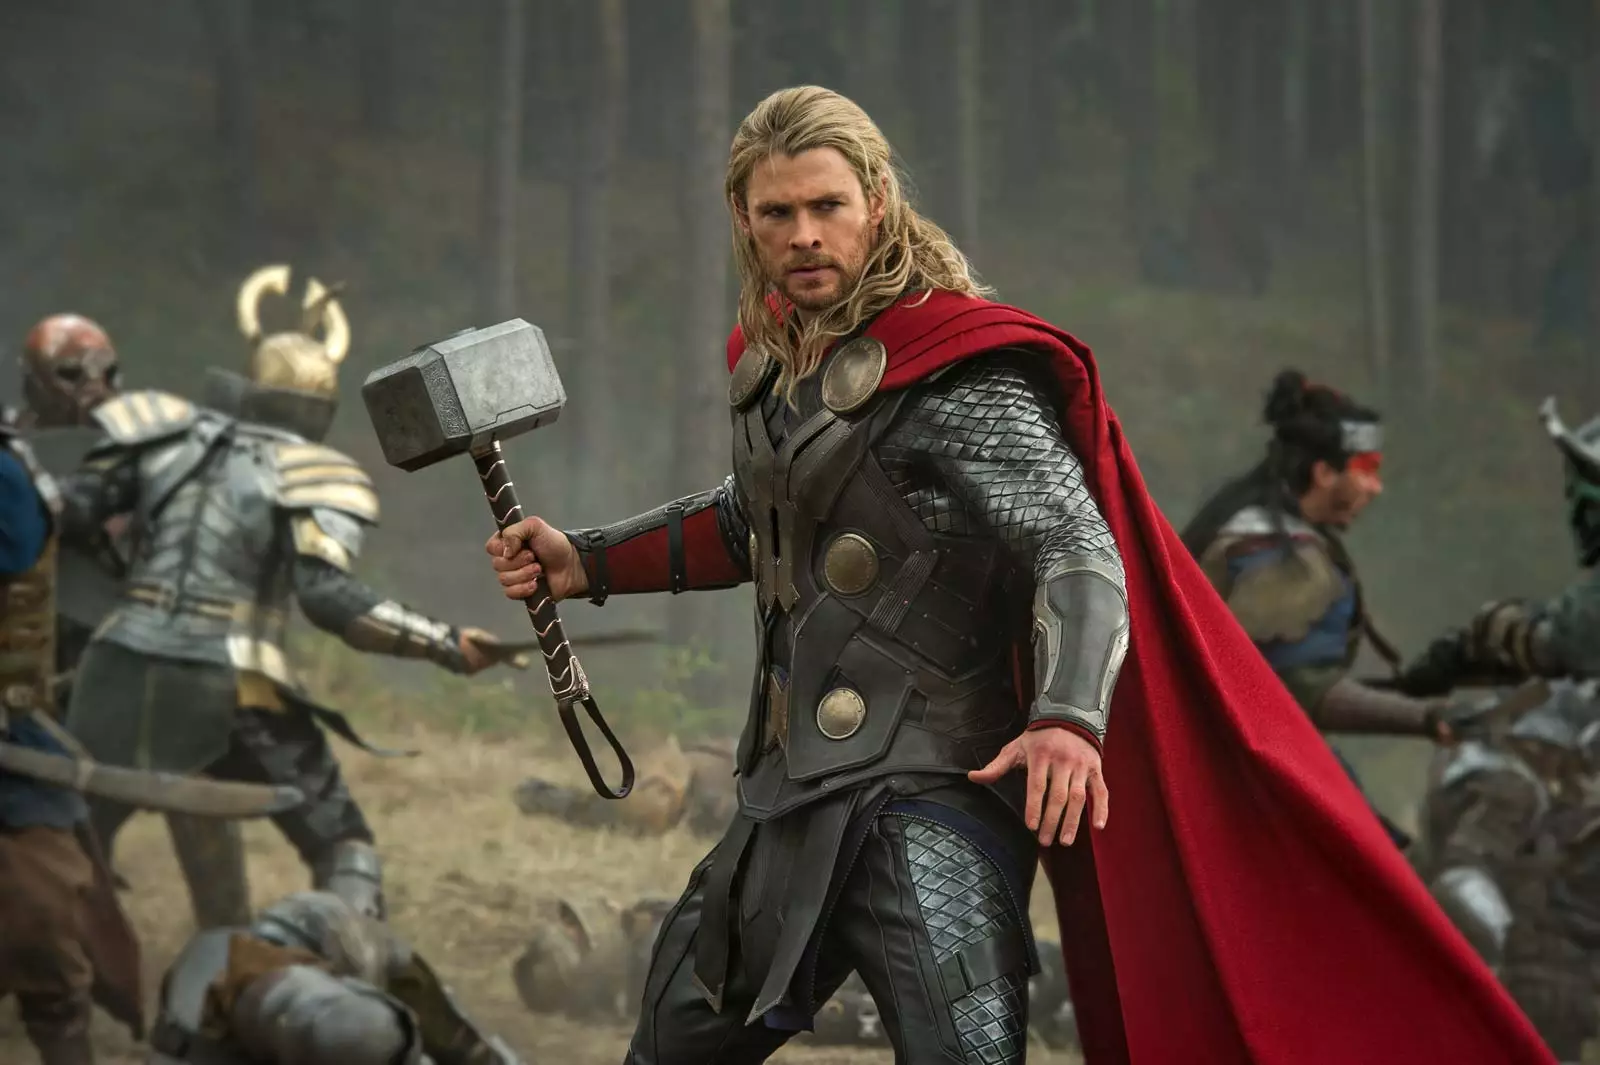 Chris will be joining Chris Hemsworth in the fourth Thor movie (